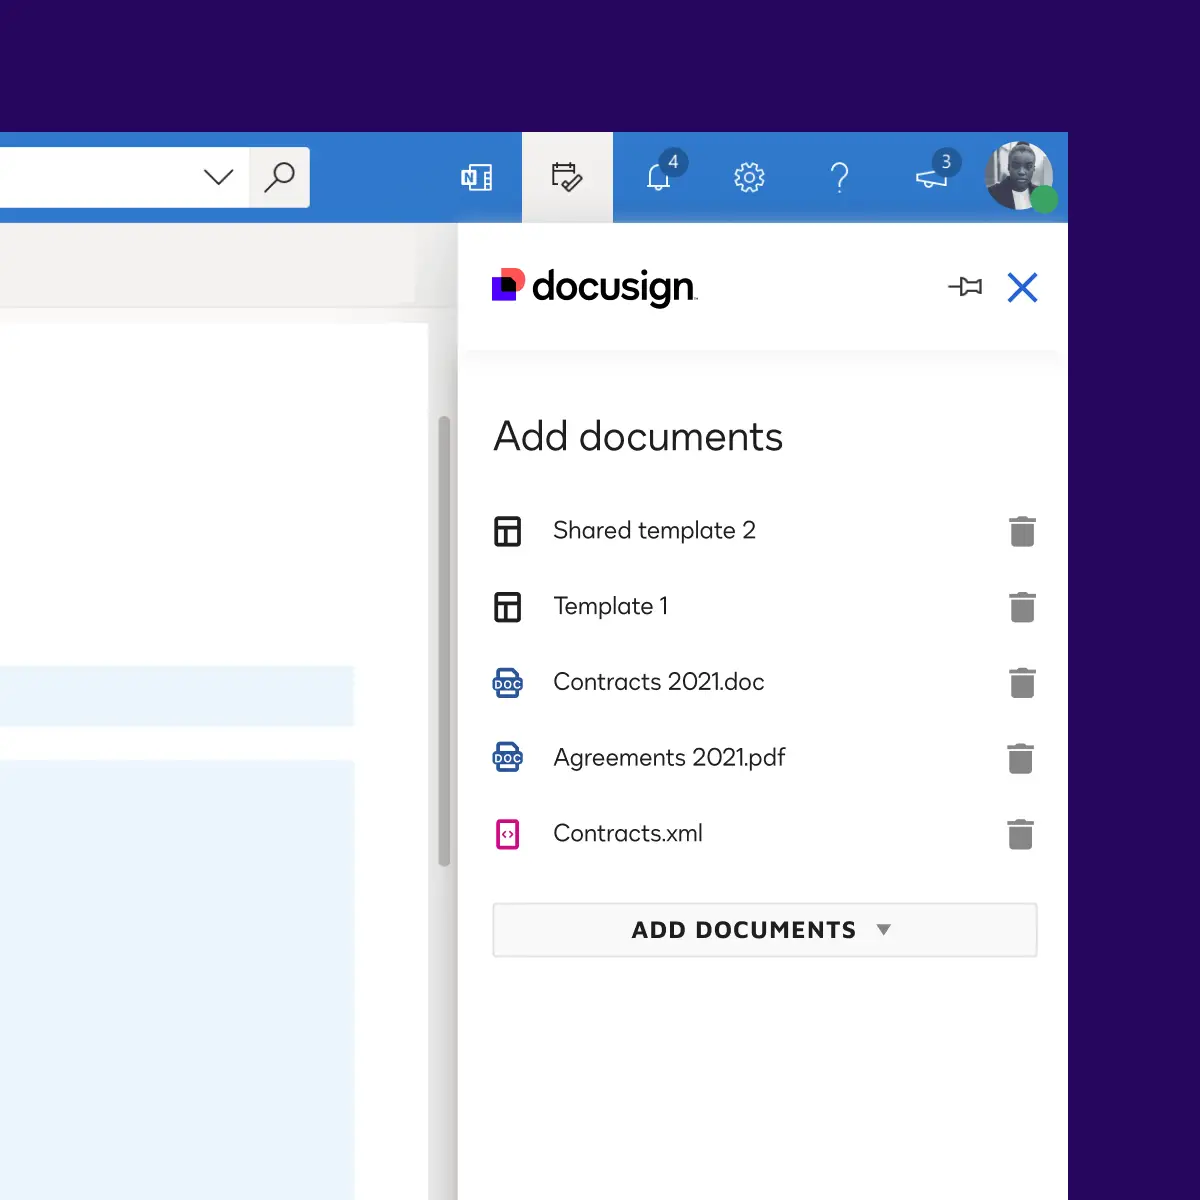 Product screenshot of Microsoft for Outlook integrated with DocuSign eSignature to add documents.